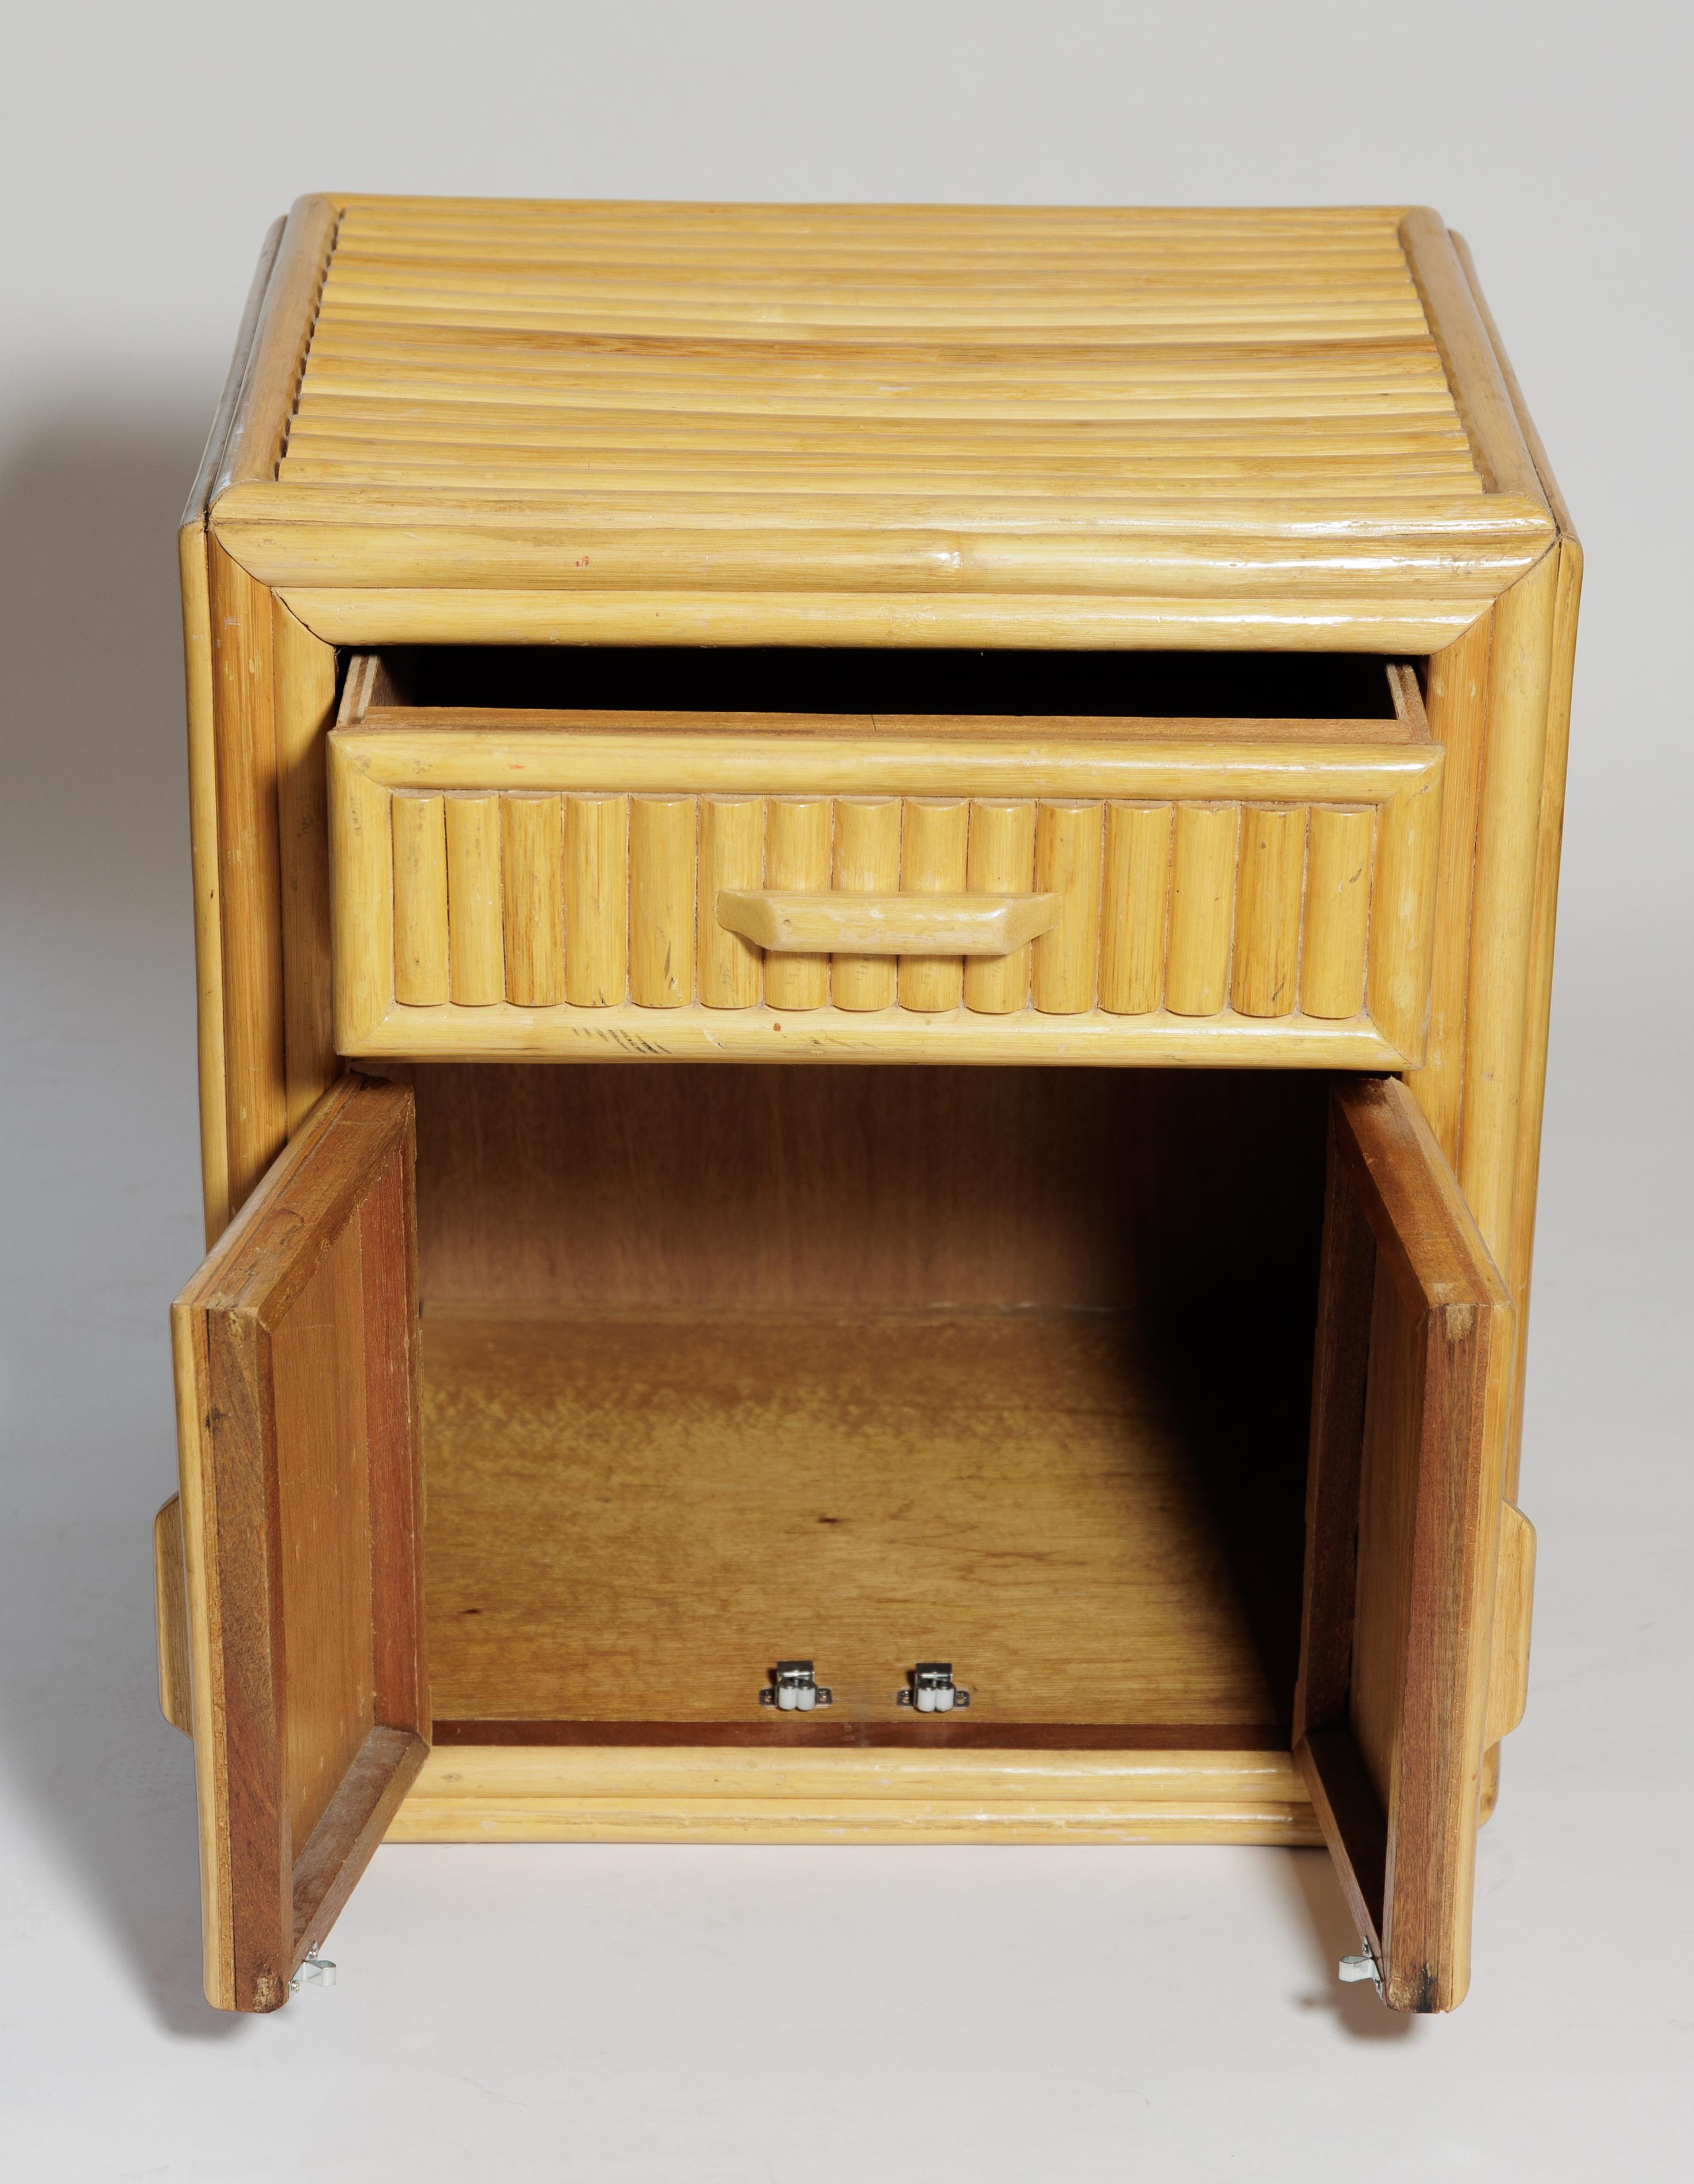 Pair of bamboo cabinets with drawer and doors.